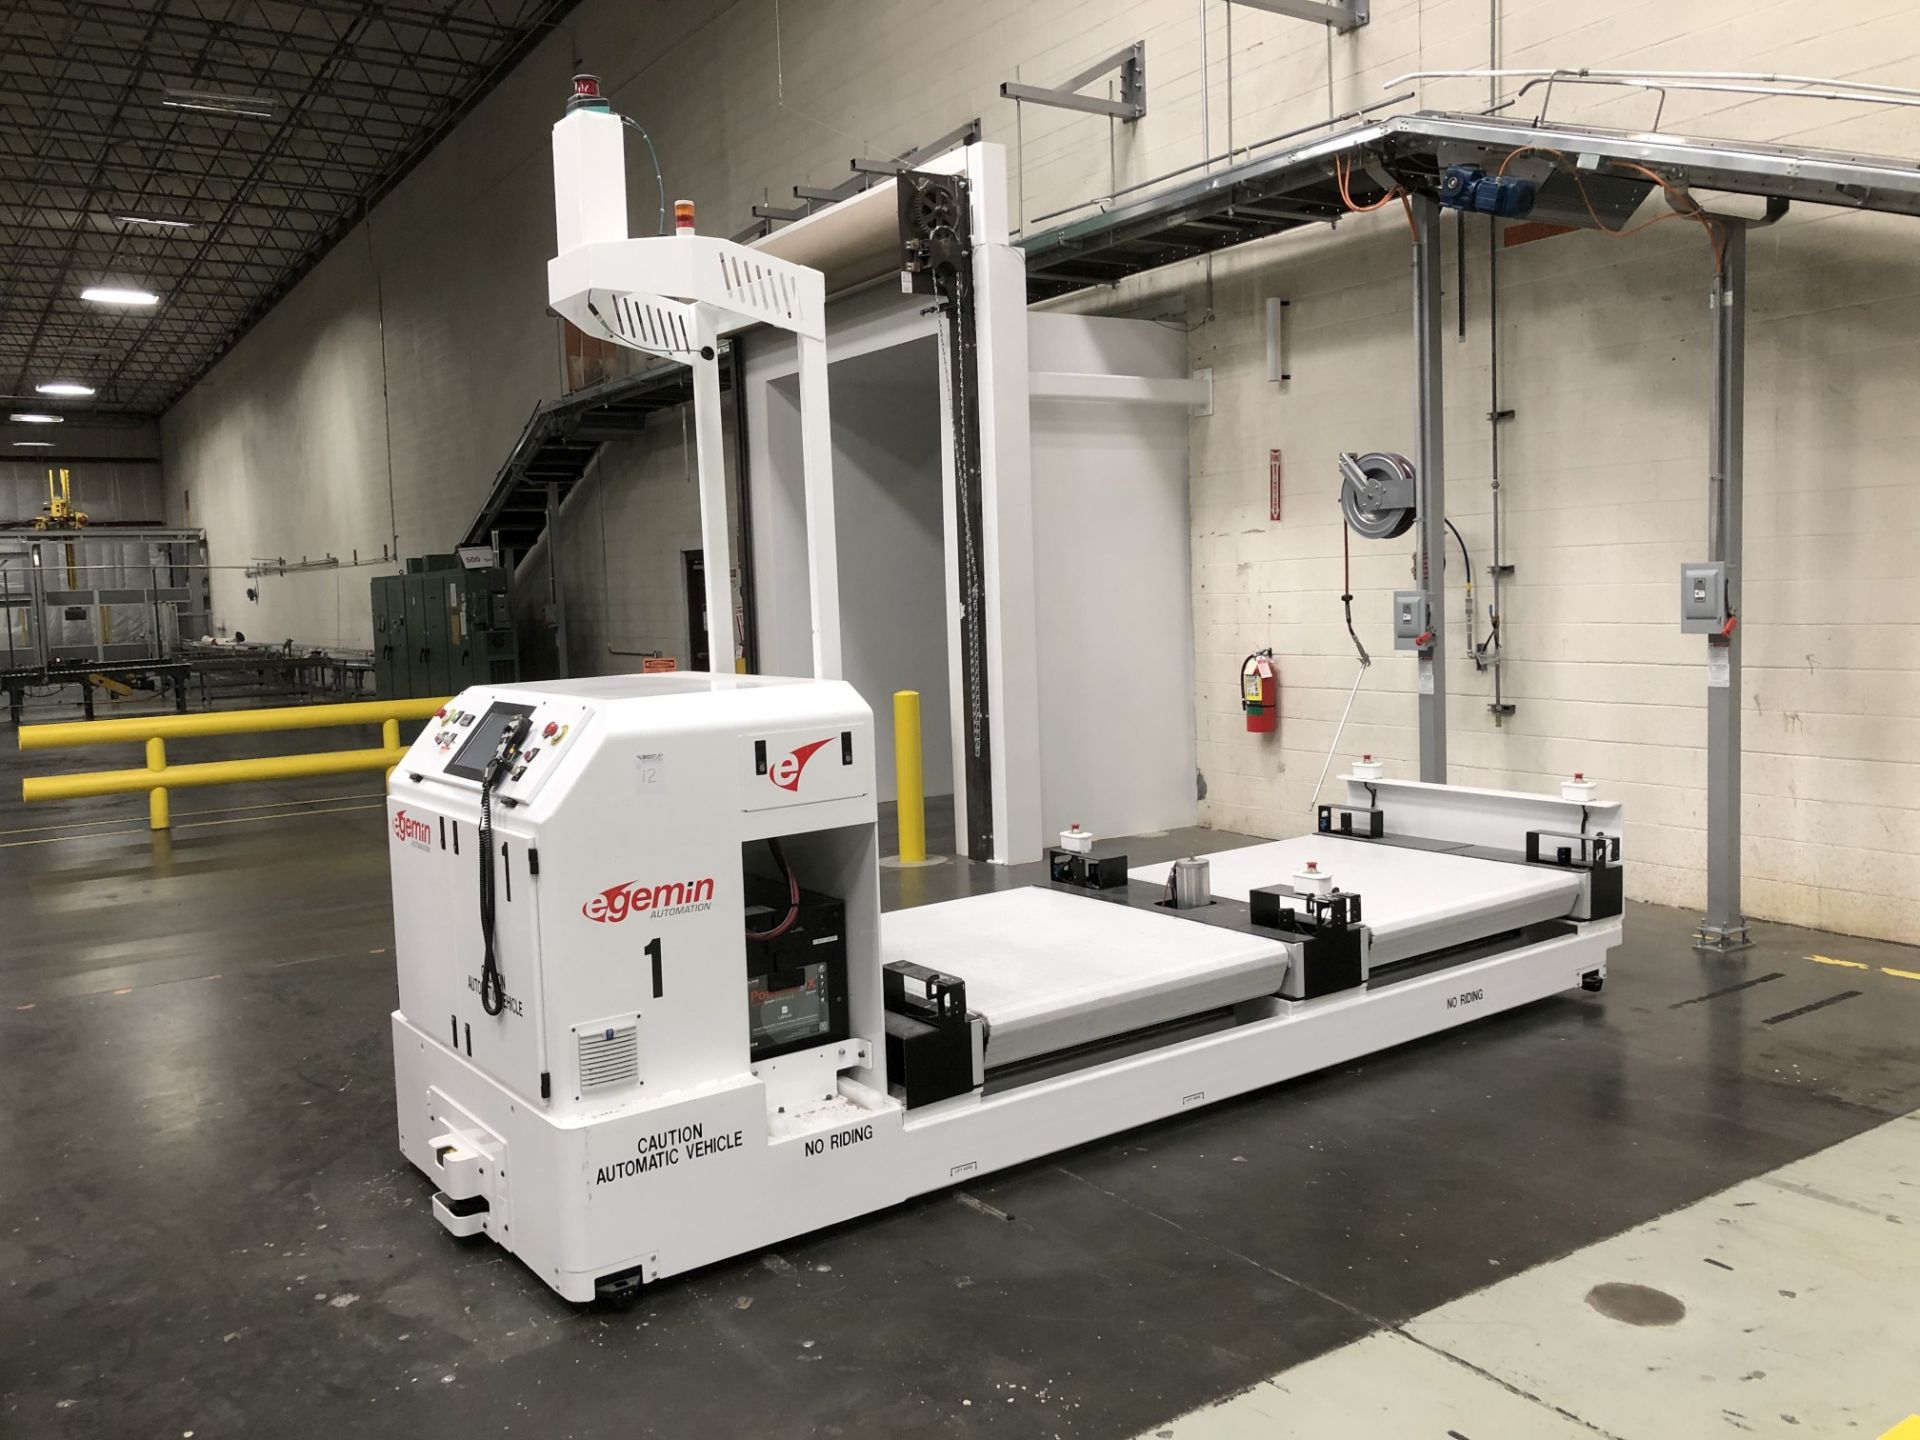 2017 Egemin Automation Unit Load Deck Automated Guided Vehicle (AGV), Model LTV 0515 L, 300 FPM - Image 2 of 11